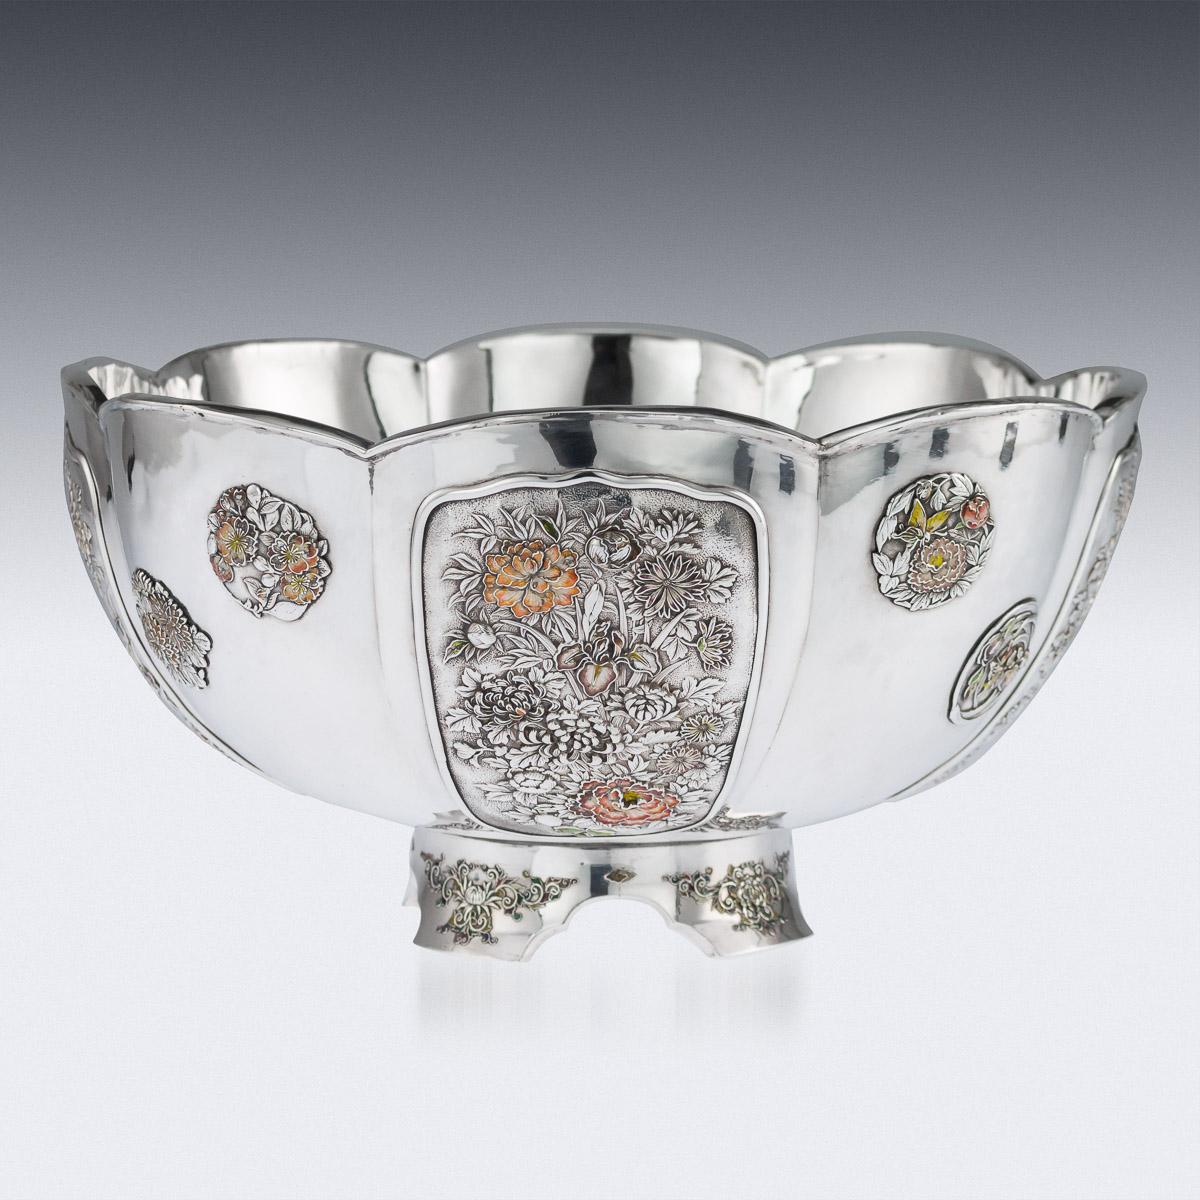 Antique early-20th century Japanese Meiji period solid silver floral bowl, exceptional and magnificent quality, double walled on a shaped spreading base, sides applied with silver and enameled panels decorated with chrysanthemum bouquets and water